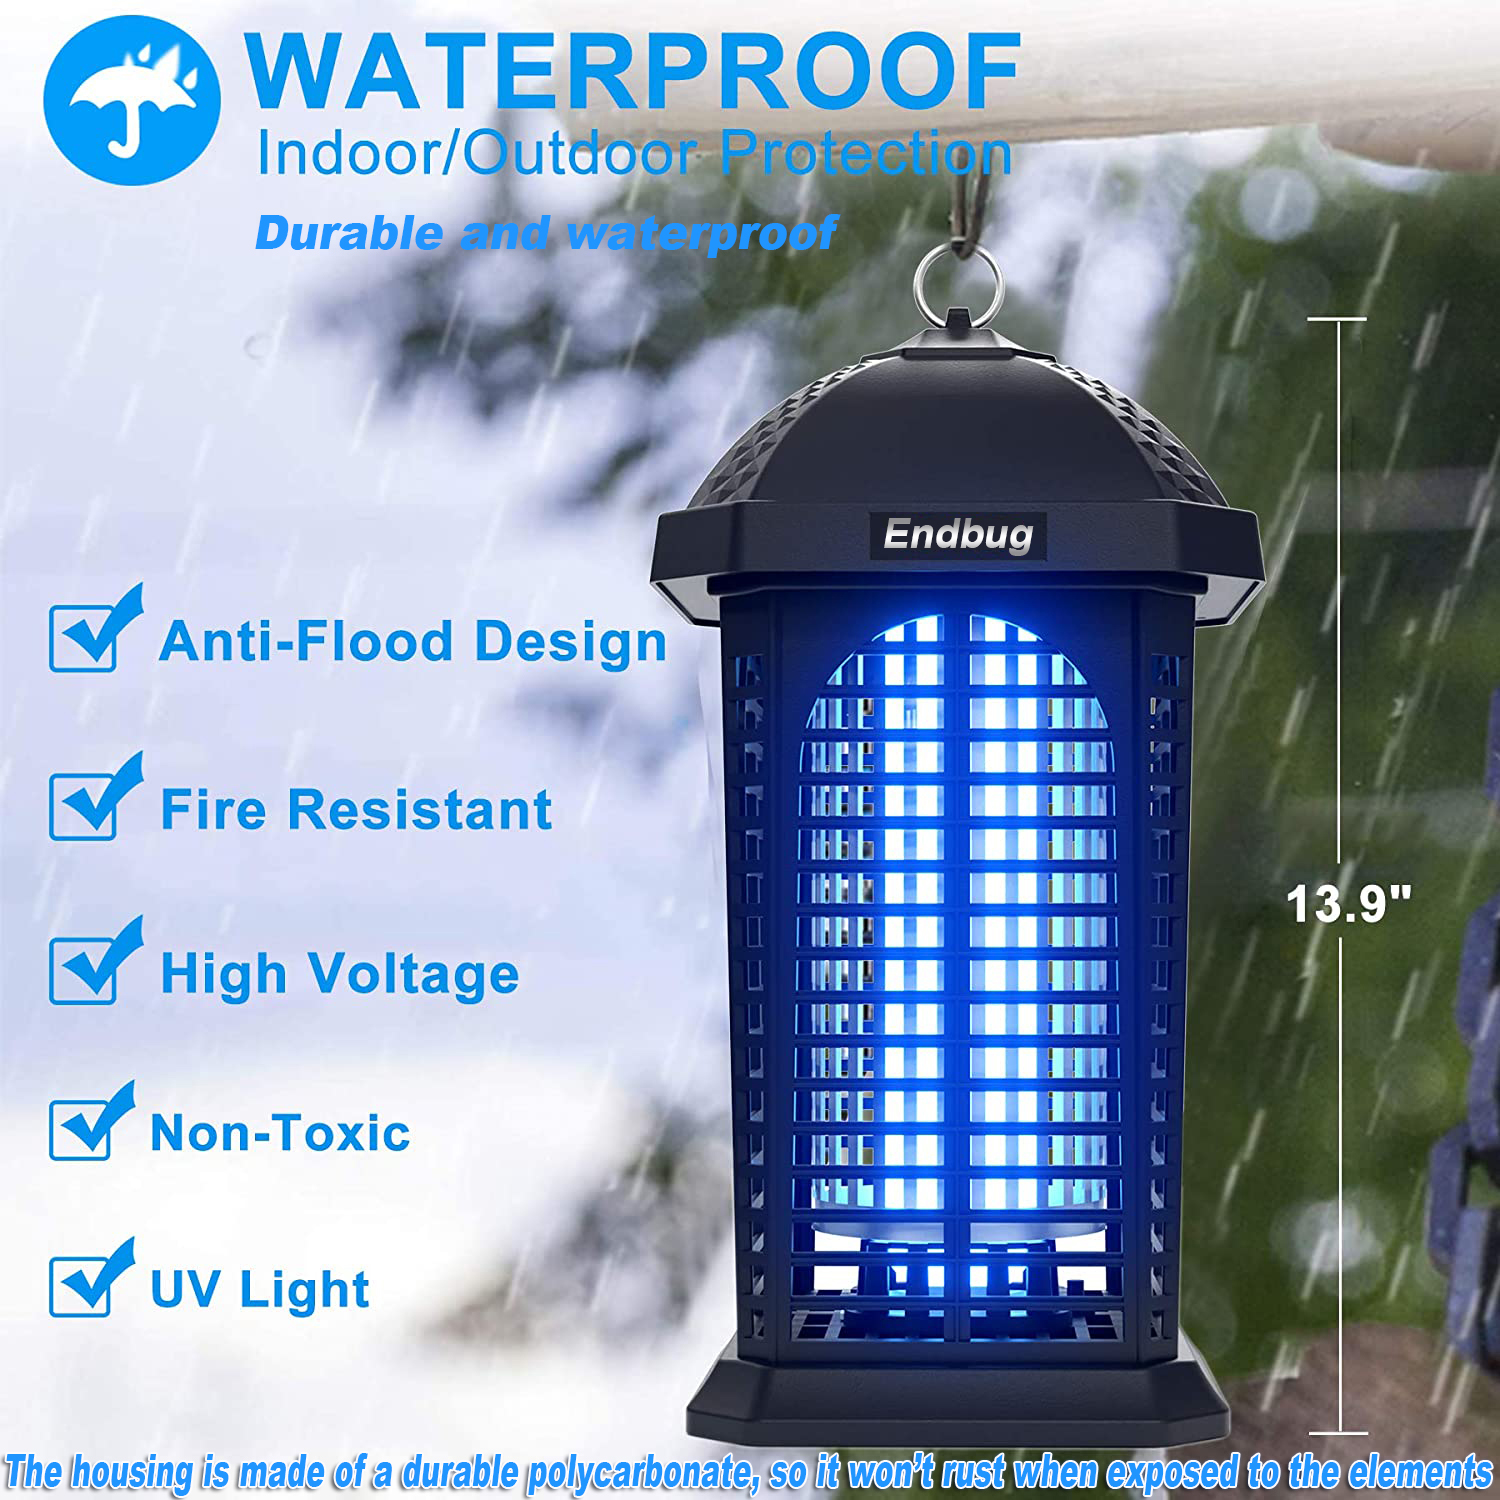 LED-Desk-Lights-Electric-Insect-Killer-Bug-Zappers-Powerful-4200V-25W-Waterproof-Mosquito-Zappers-Lamp-with-UV-Light-Protective-ABS-Housing-for-Indoor-Outdoor-76